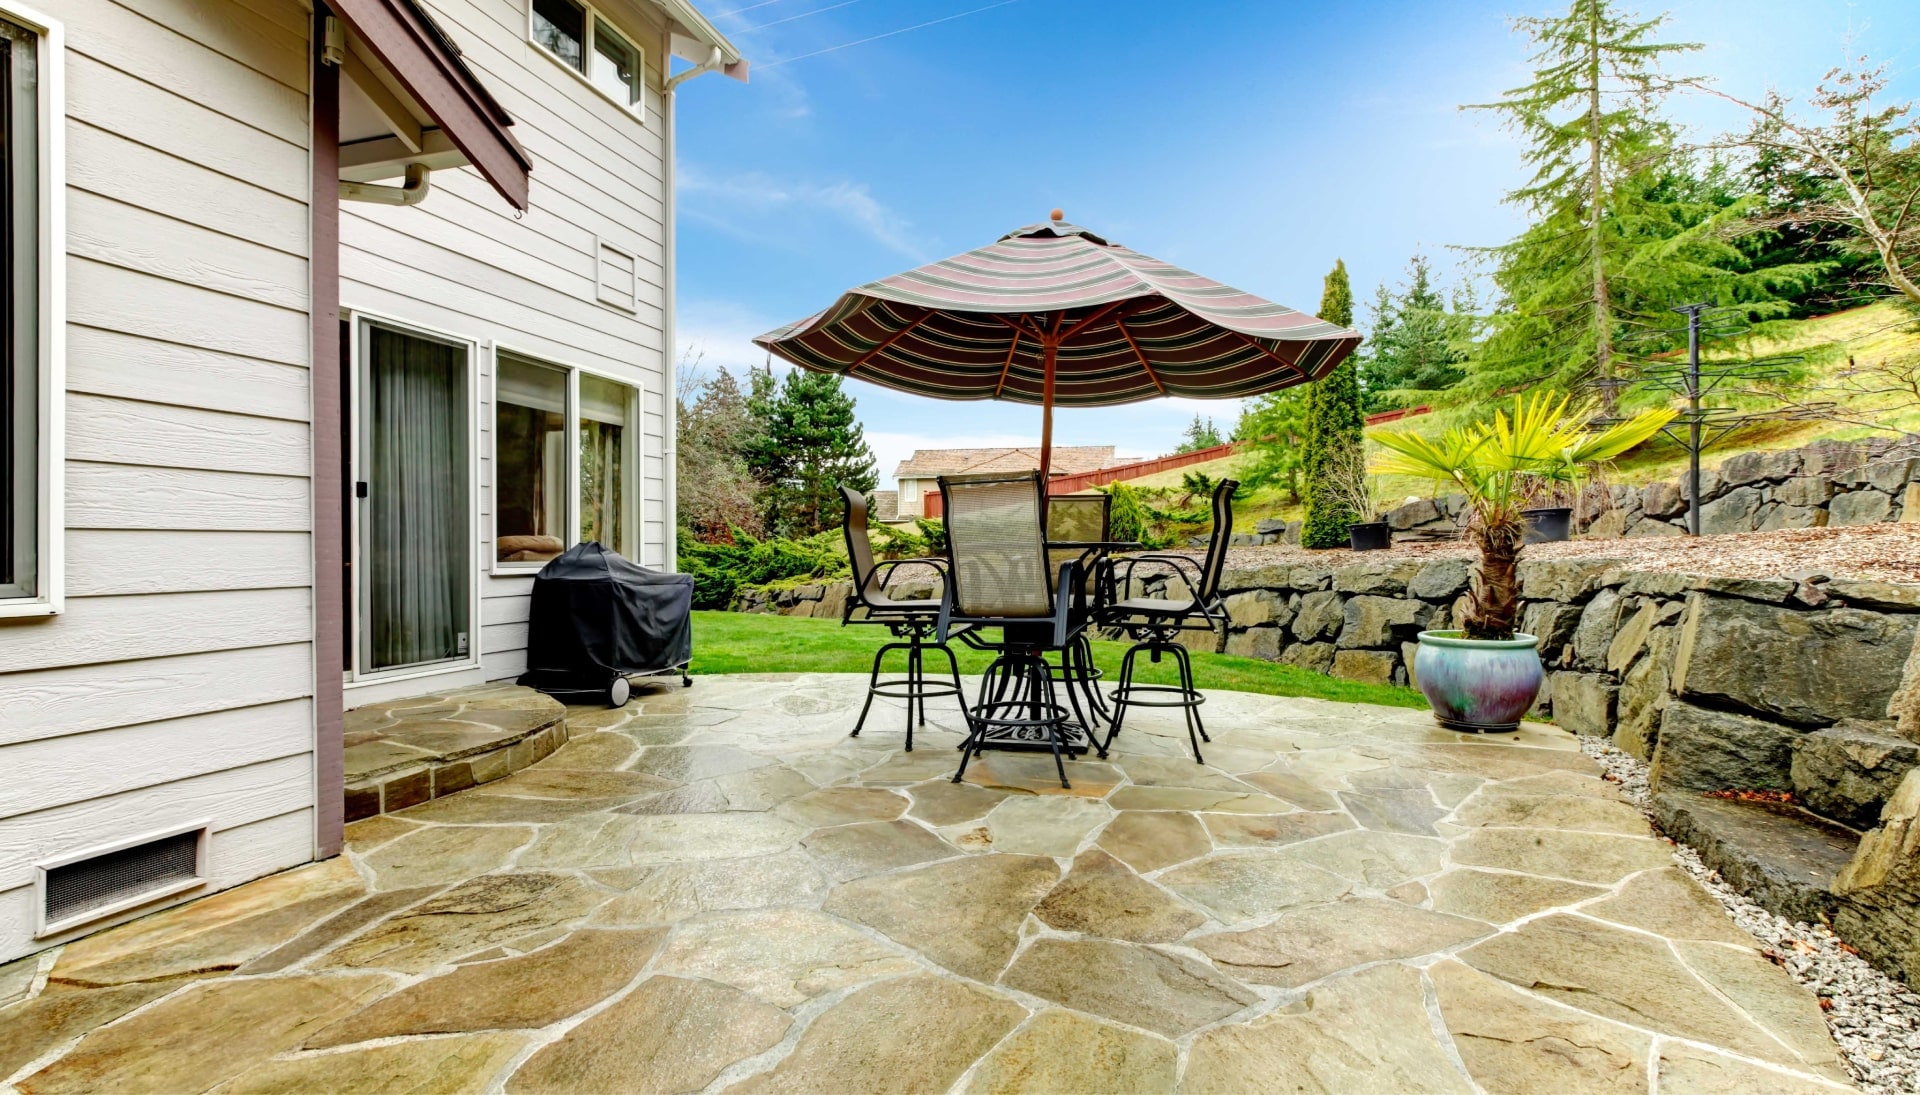 Beautifully Textured and Patterned Concrete Patios in Canton, Michigan